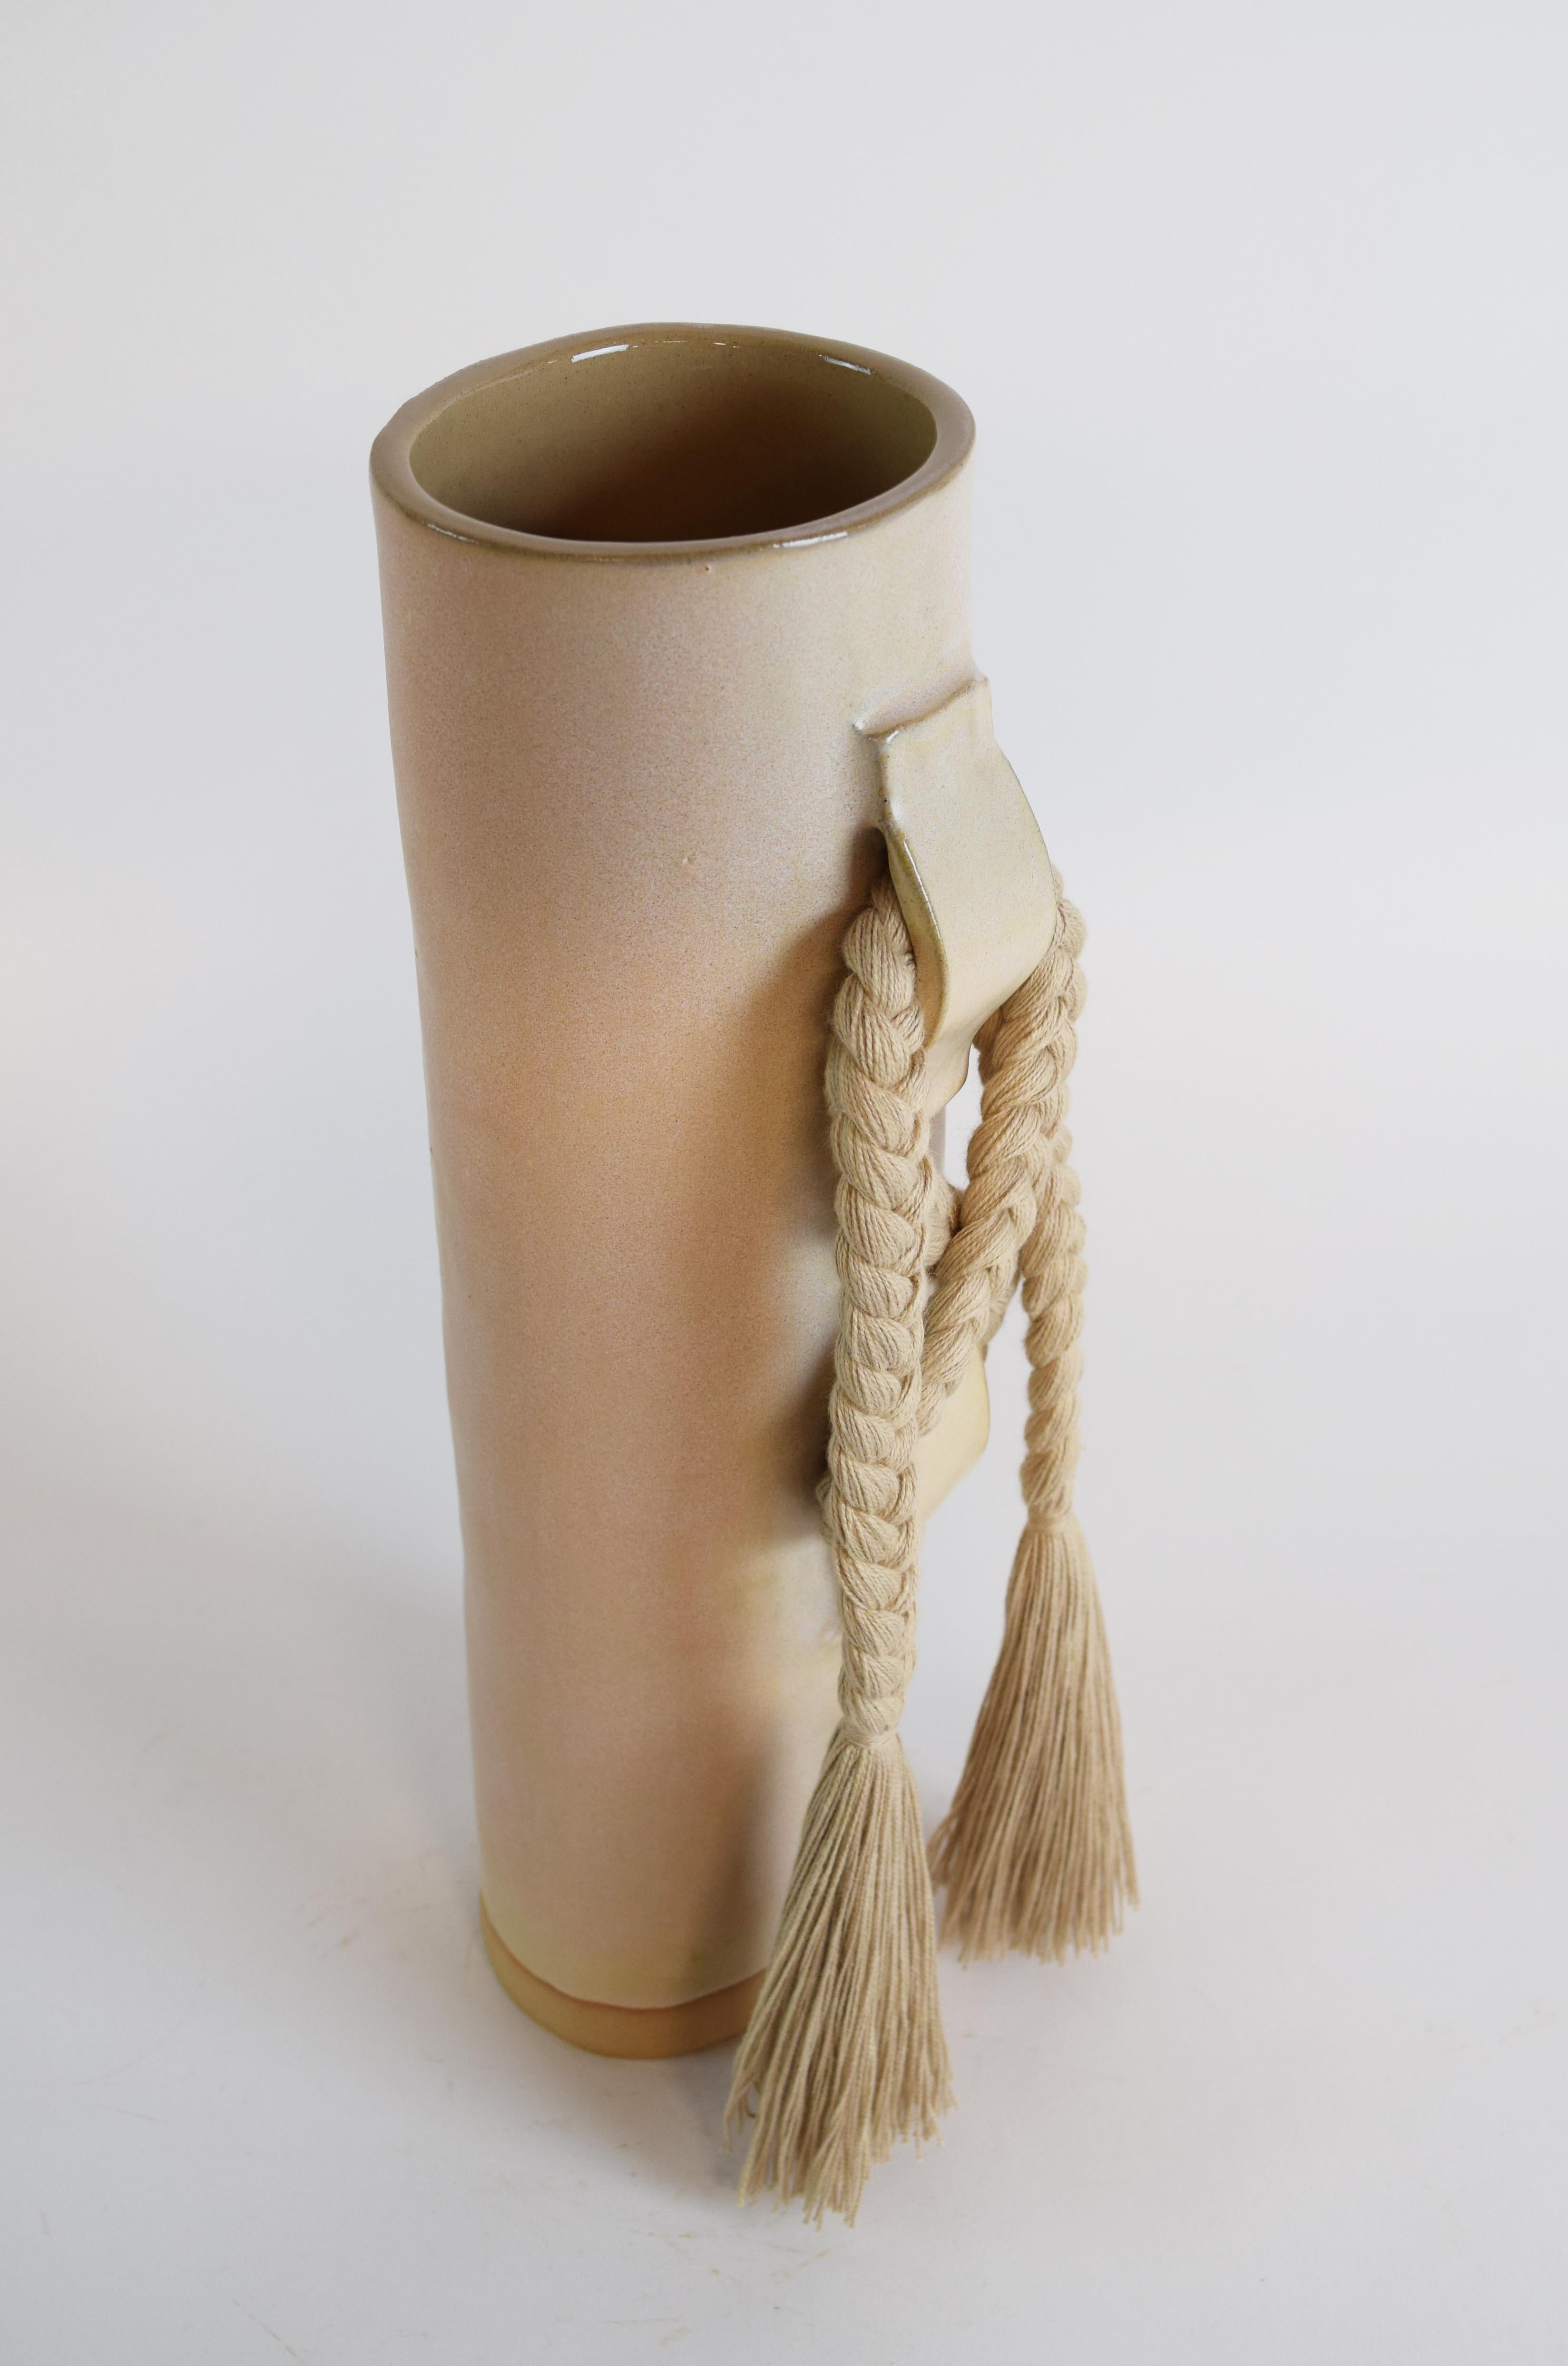 Organic Modern Handmade Ceramic Vase #696 in Satin Tan with Tan Cotton Braid and Fringe For Sale